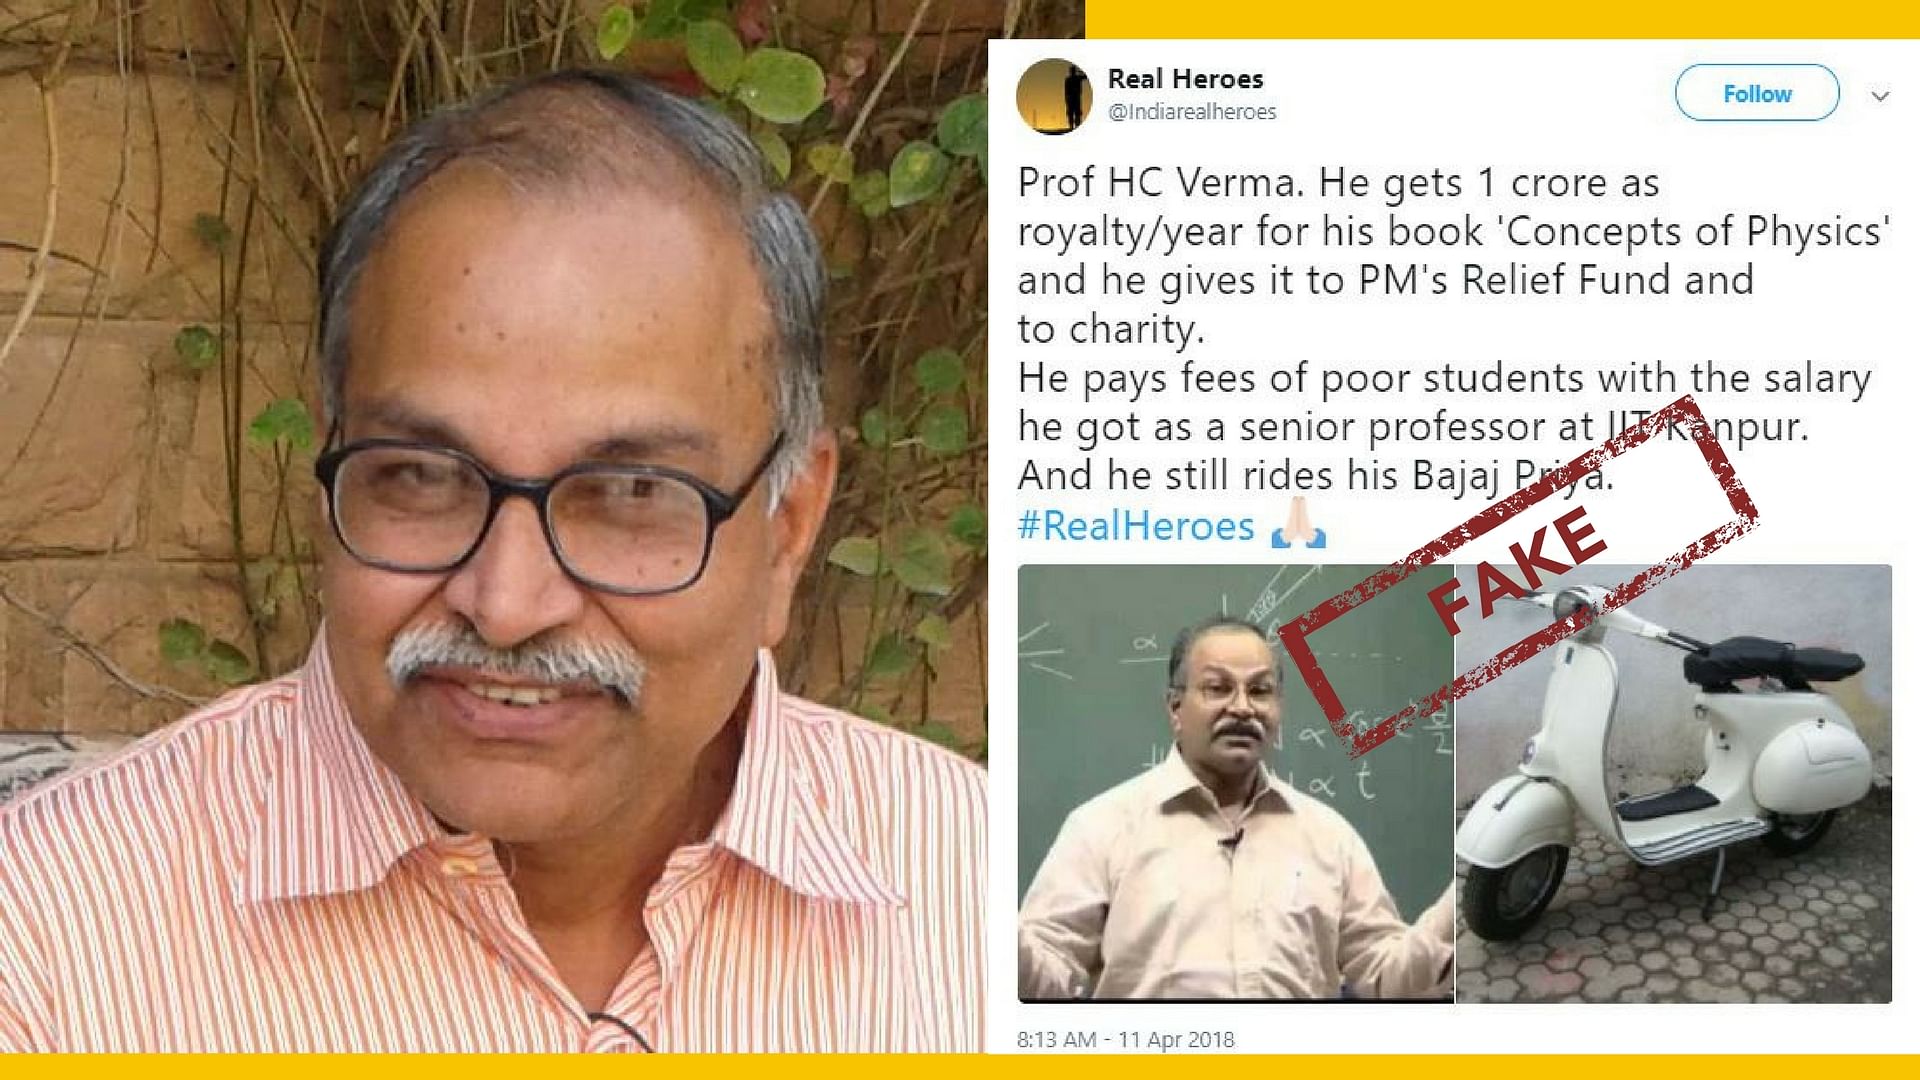  Professor Verma is a familiar name and it was not surprising that the tweet struck a chord with social media users.